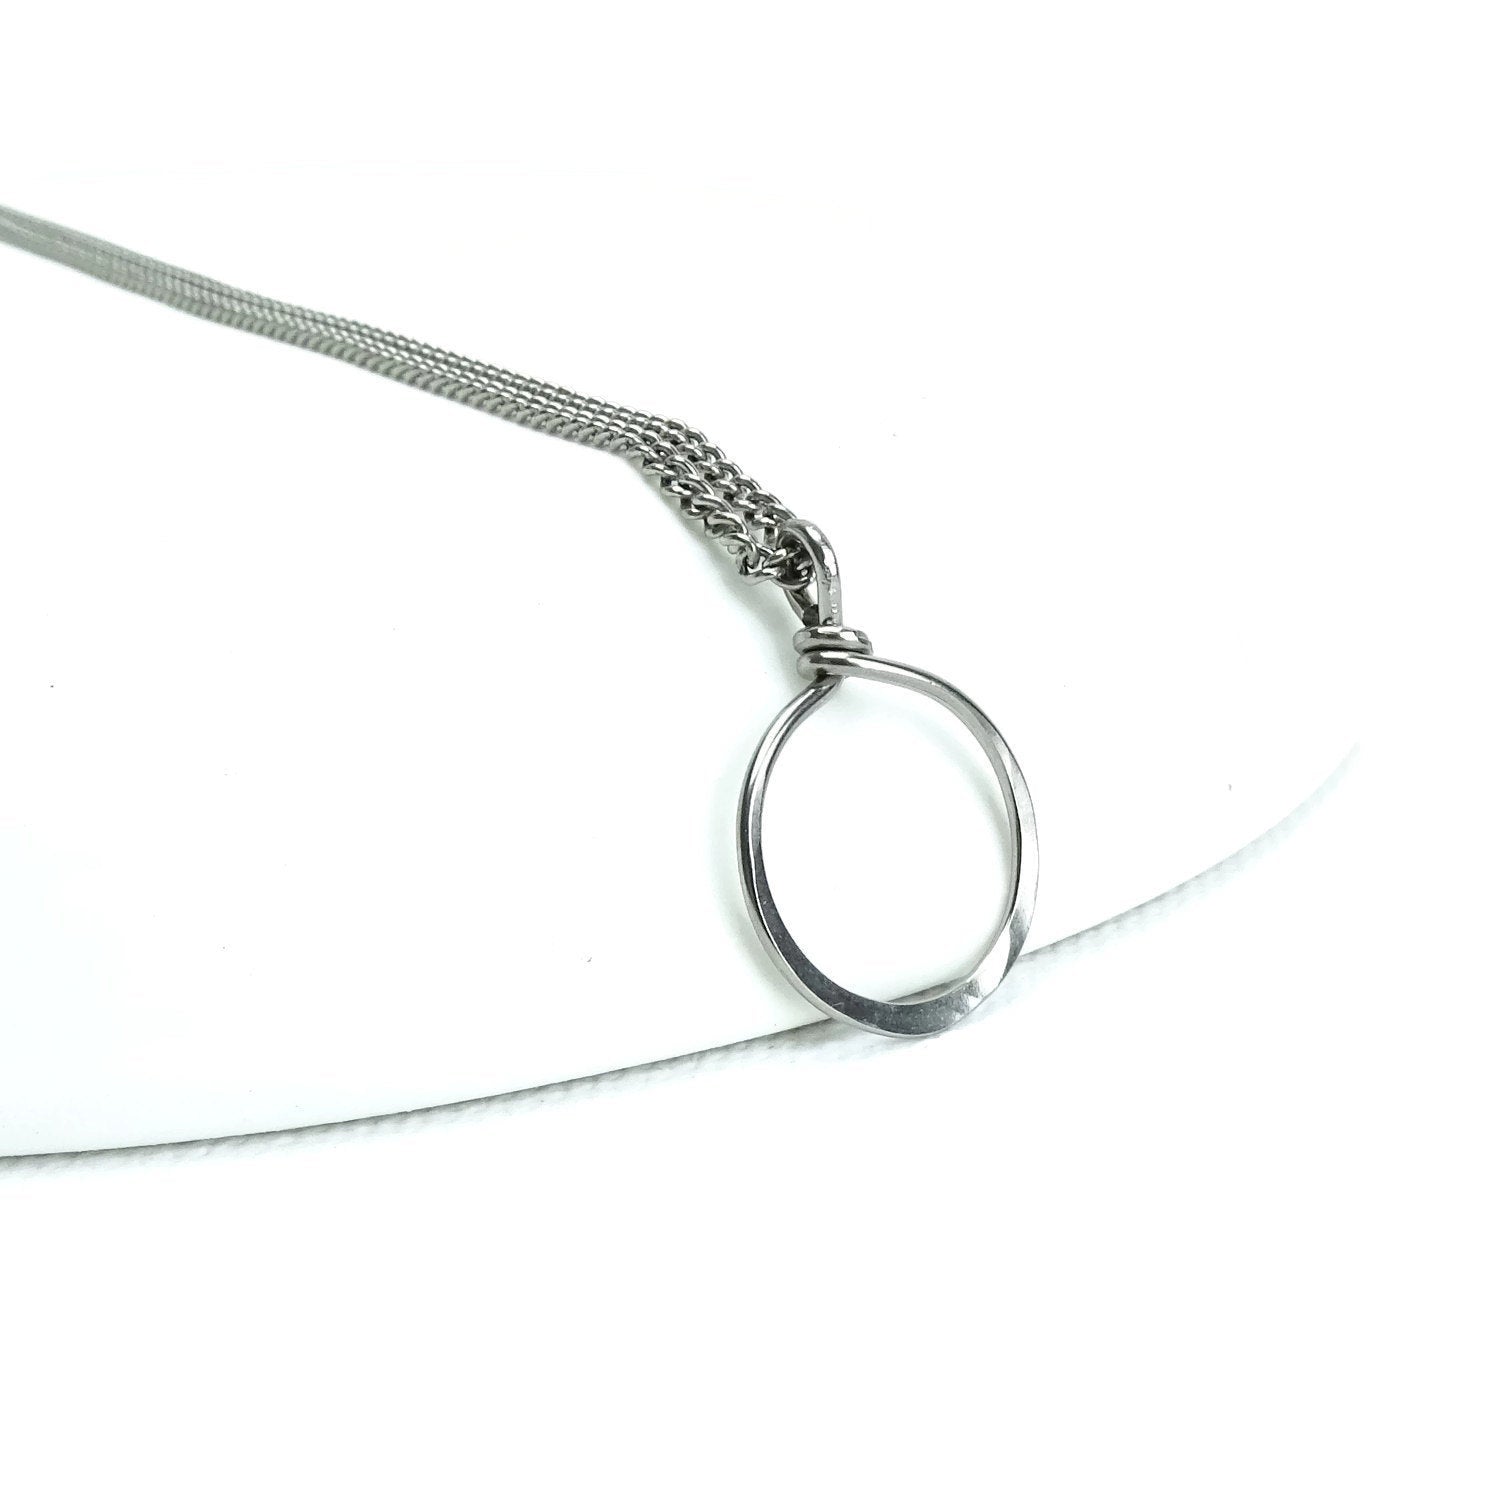 Small Hoop Titanium Necklace Simple Modern Small Hammered Circle Necklace Hypoallergenic Niobium and Titanium Necklace for Sensitive Skin